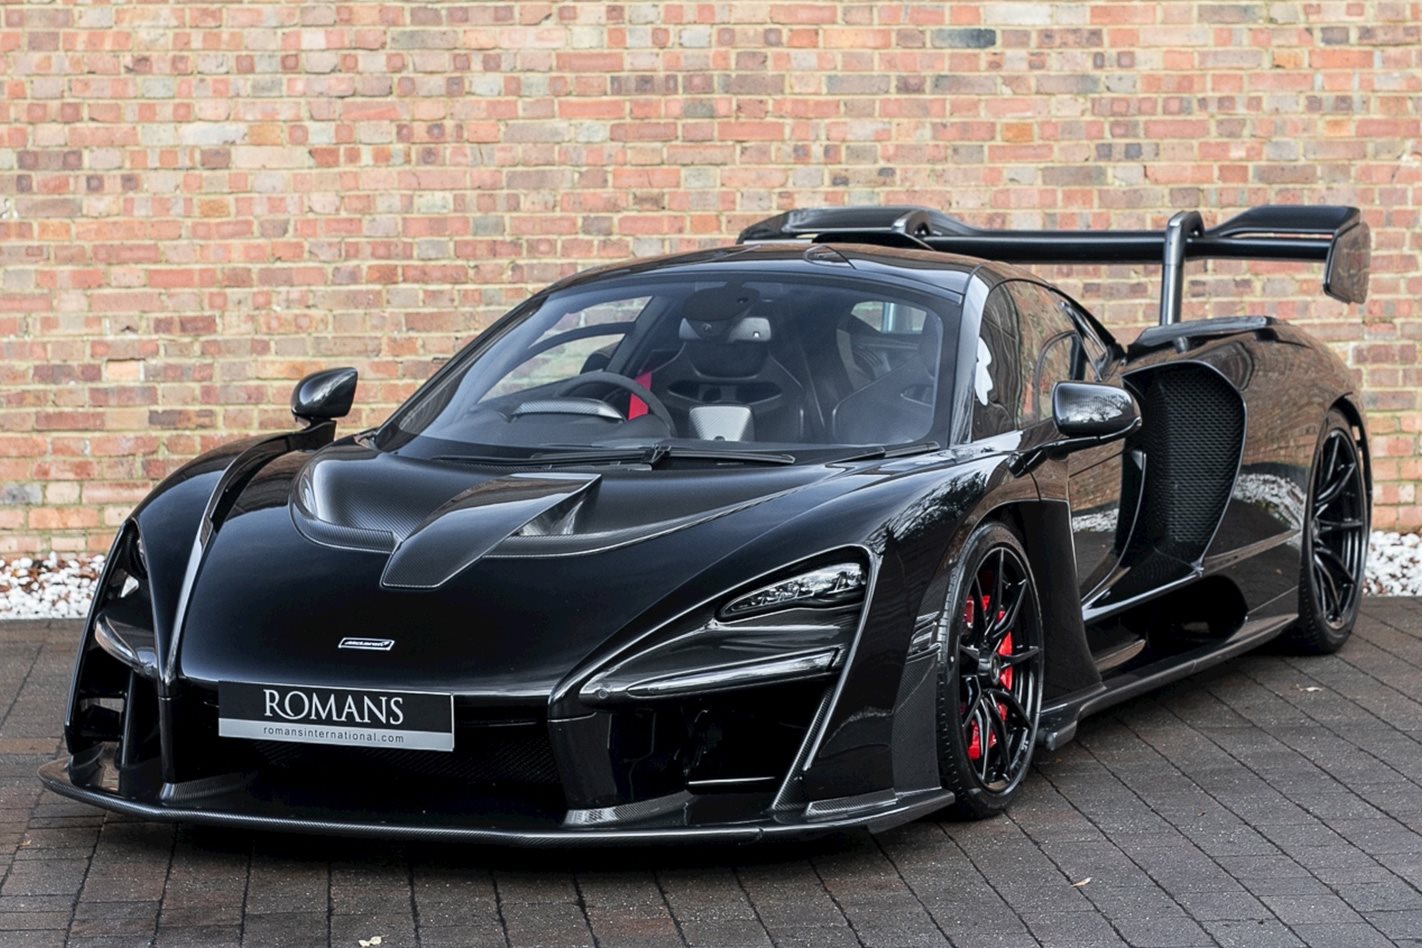 McLaren Senna for sale with 11km on the odometer